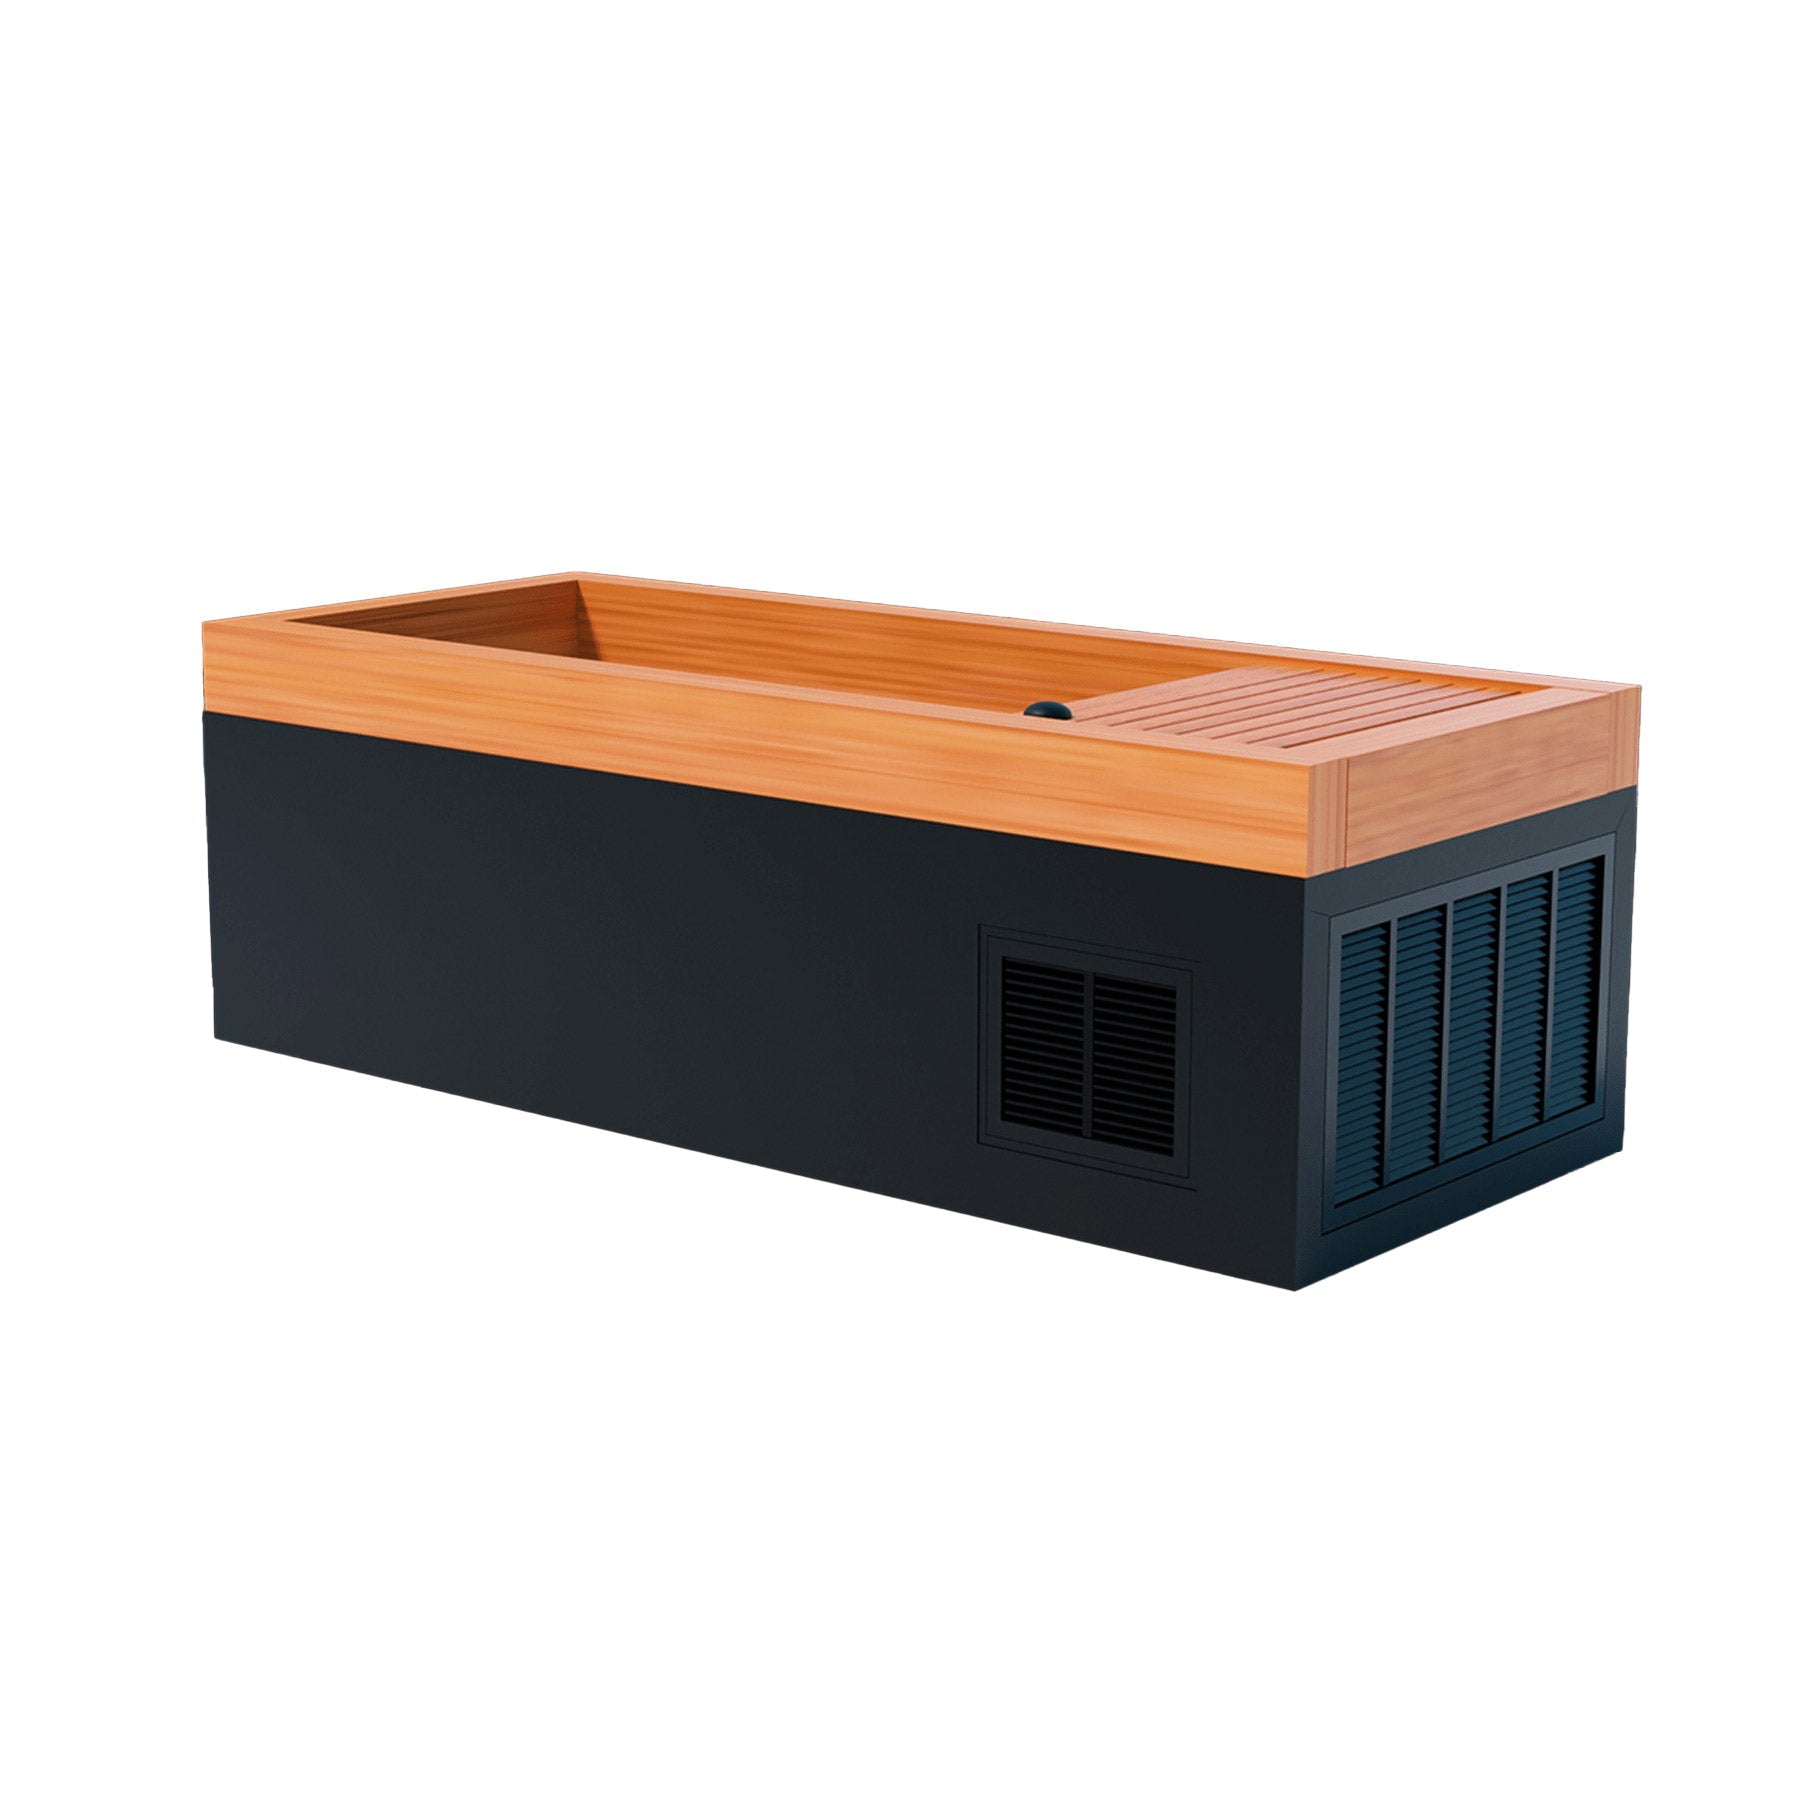 A black box with a wooden lid, perfect for a Medical Frozen 4 Cold Plunge by Medical Sauna.